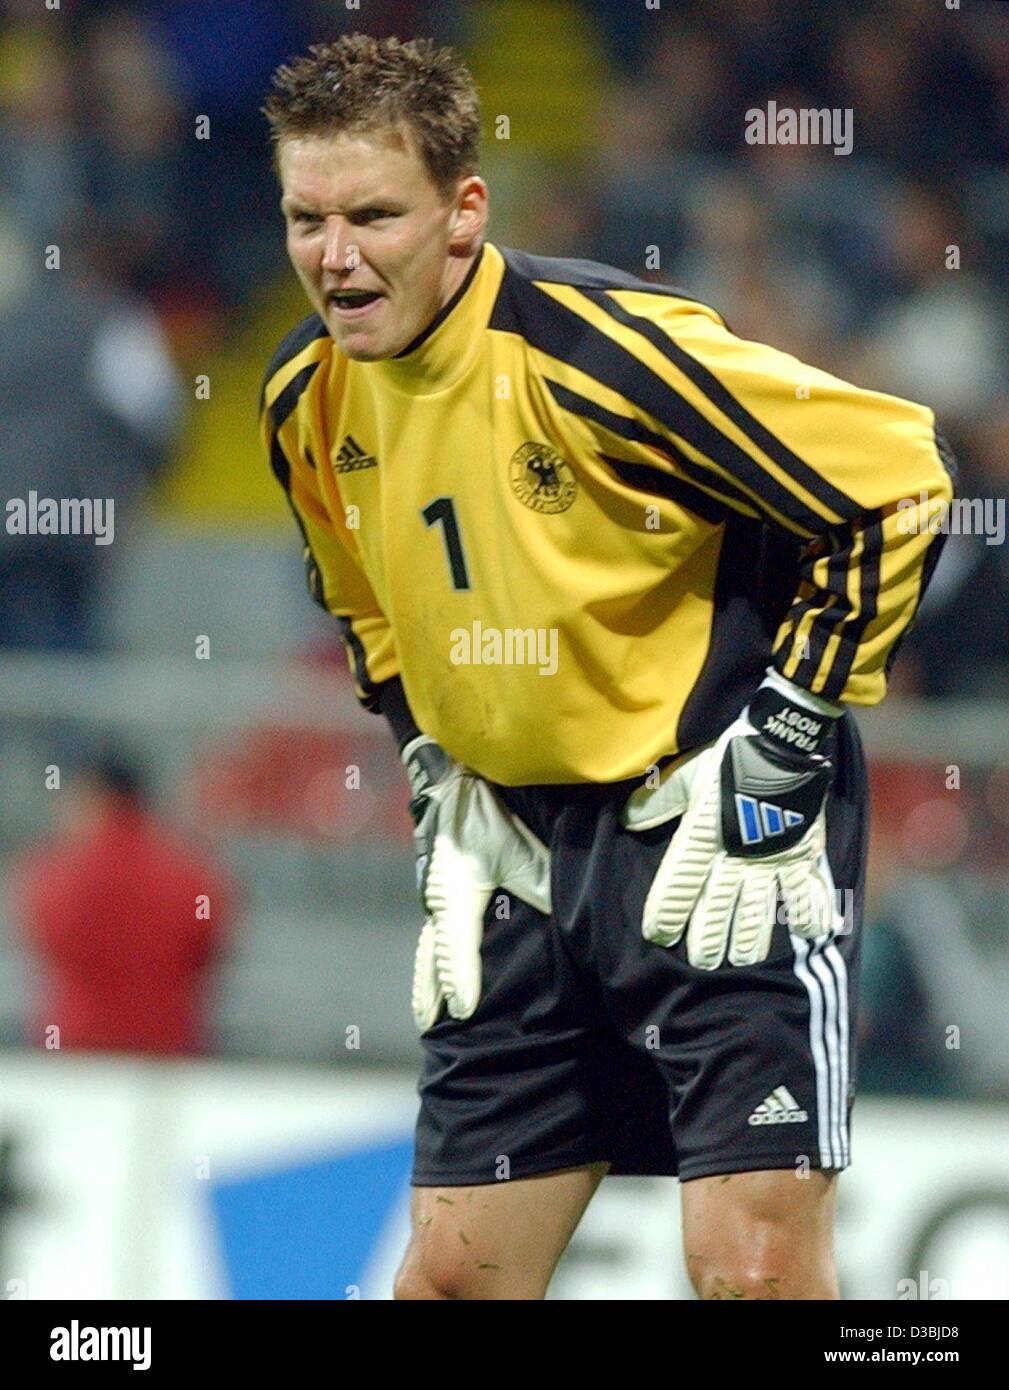 (dpa) - German goalkeeper Frank Rost shouts advice at the players during the friendly international Germany against Serbia-Montenegro in Bremen, Germany, 30 April 2003. Germany won 1-0 (0-0). Stock Photo